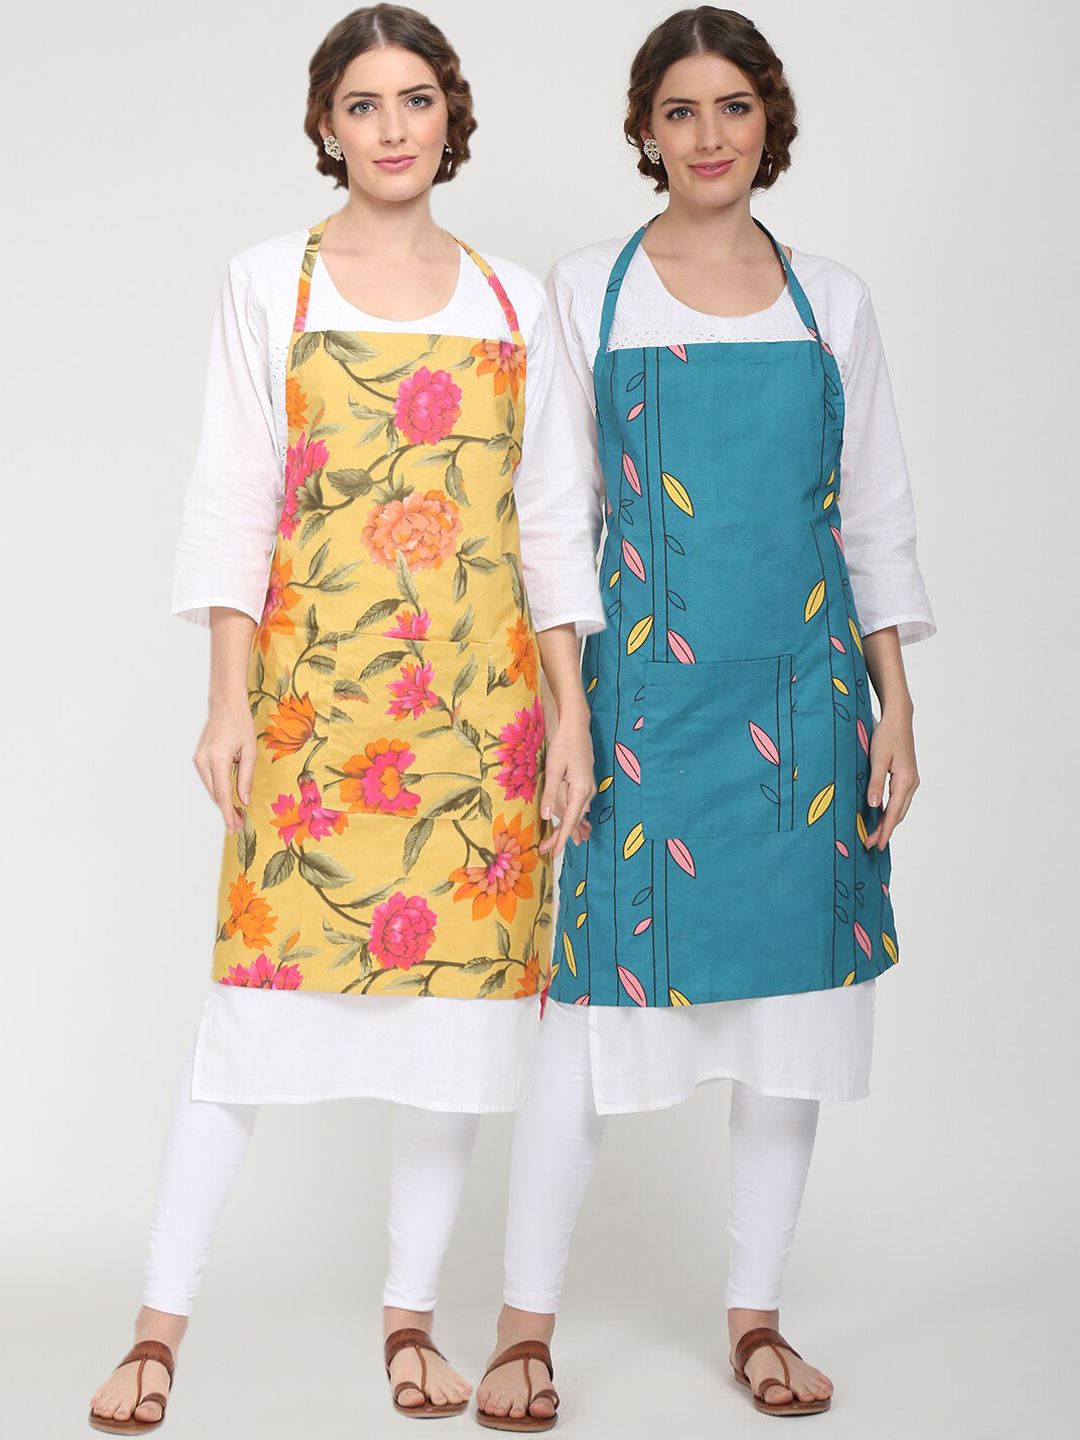 TAG 7 Set of 2 Printed Aprons With Pockets Price in India